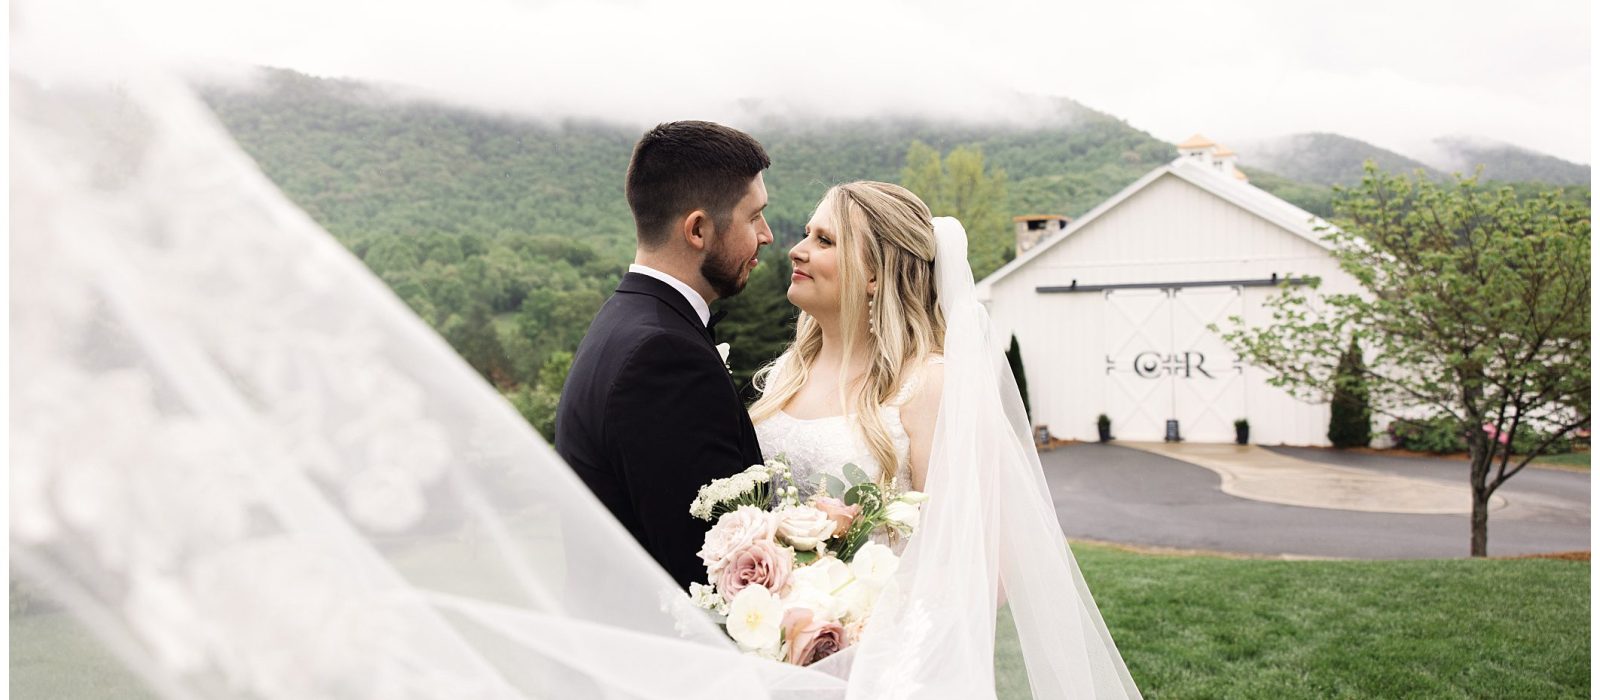 Bride and groom exchanging a loving gaze outdoors with a mountain backdrop at Chestnut Ridge, framed by the bride's flowing veil.